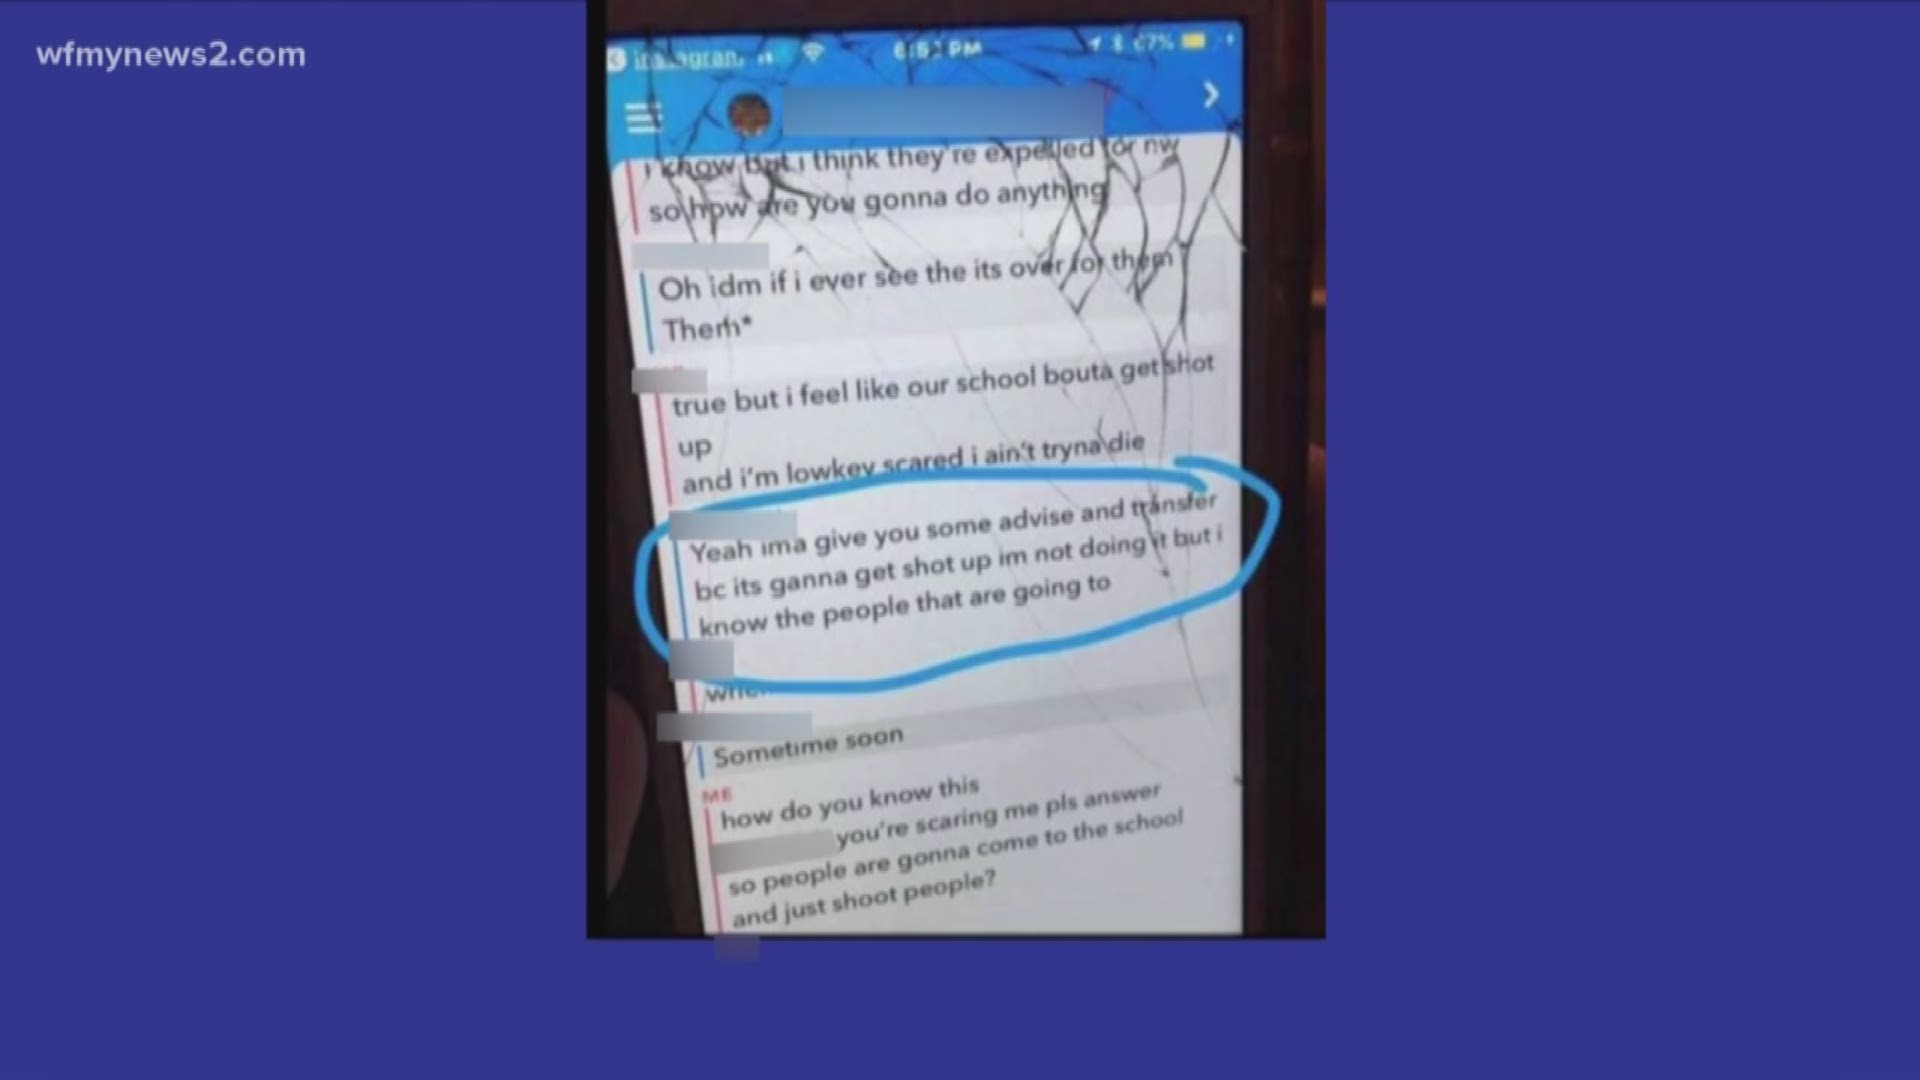 The Guilford County Sheriff's Office is investigating a screengrab that talks about someone possibly shooting up the school.